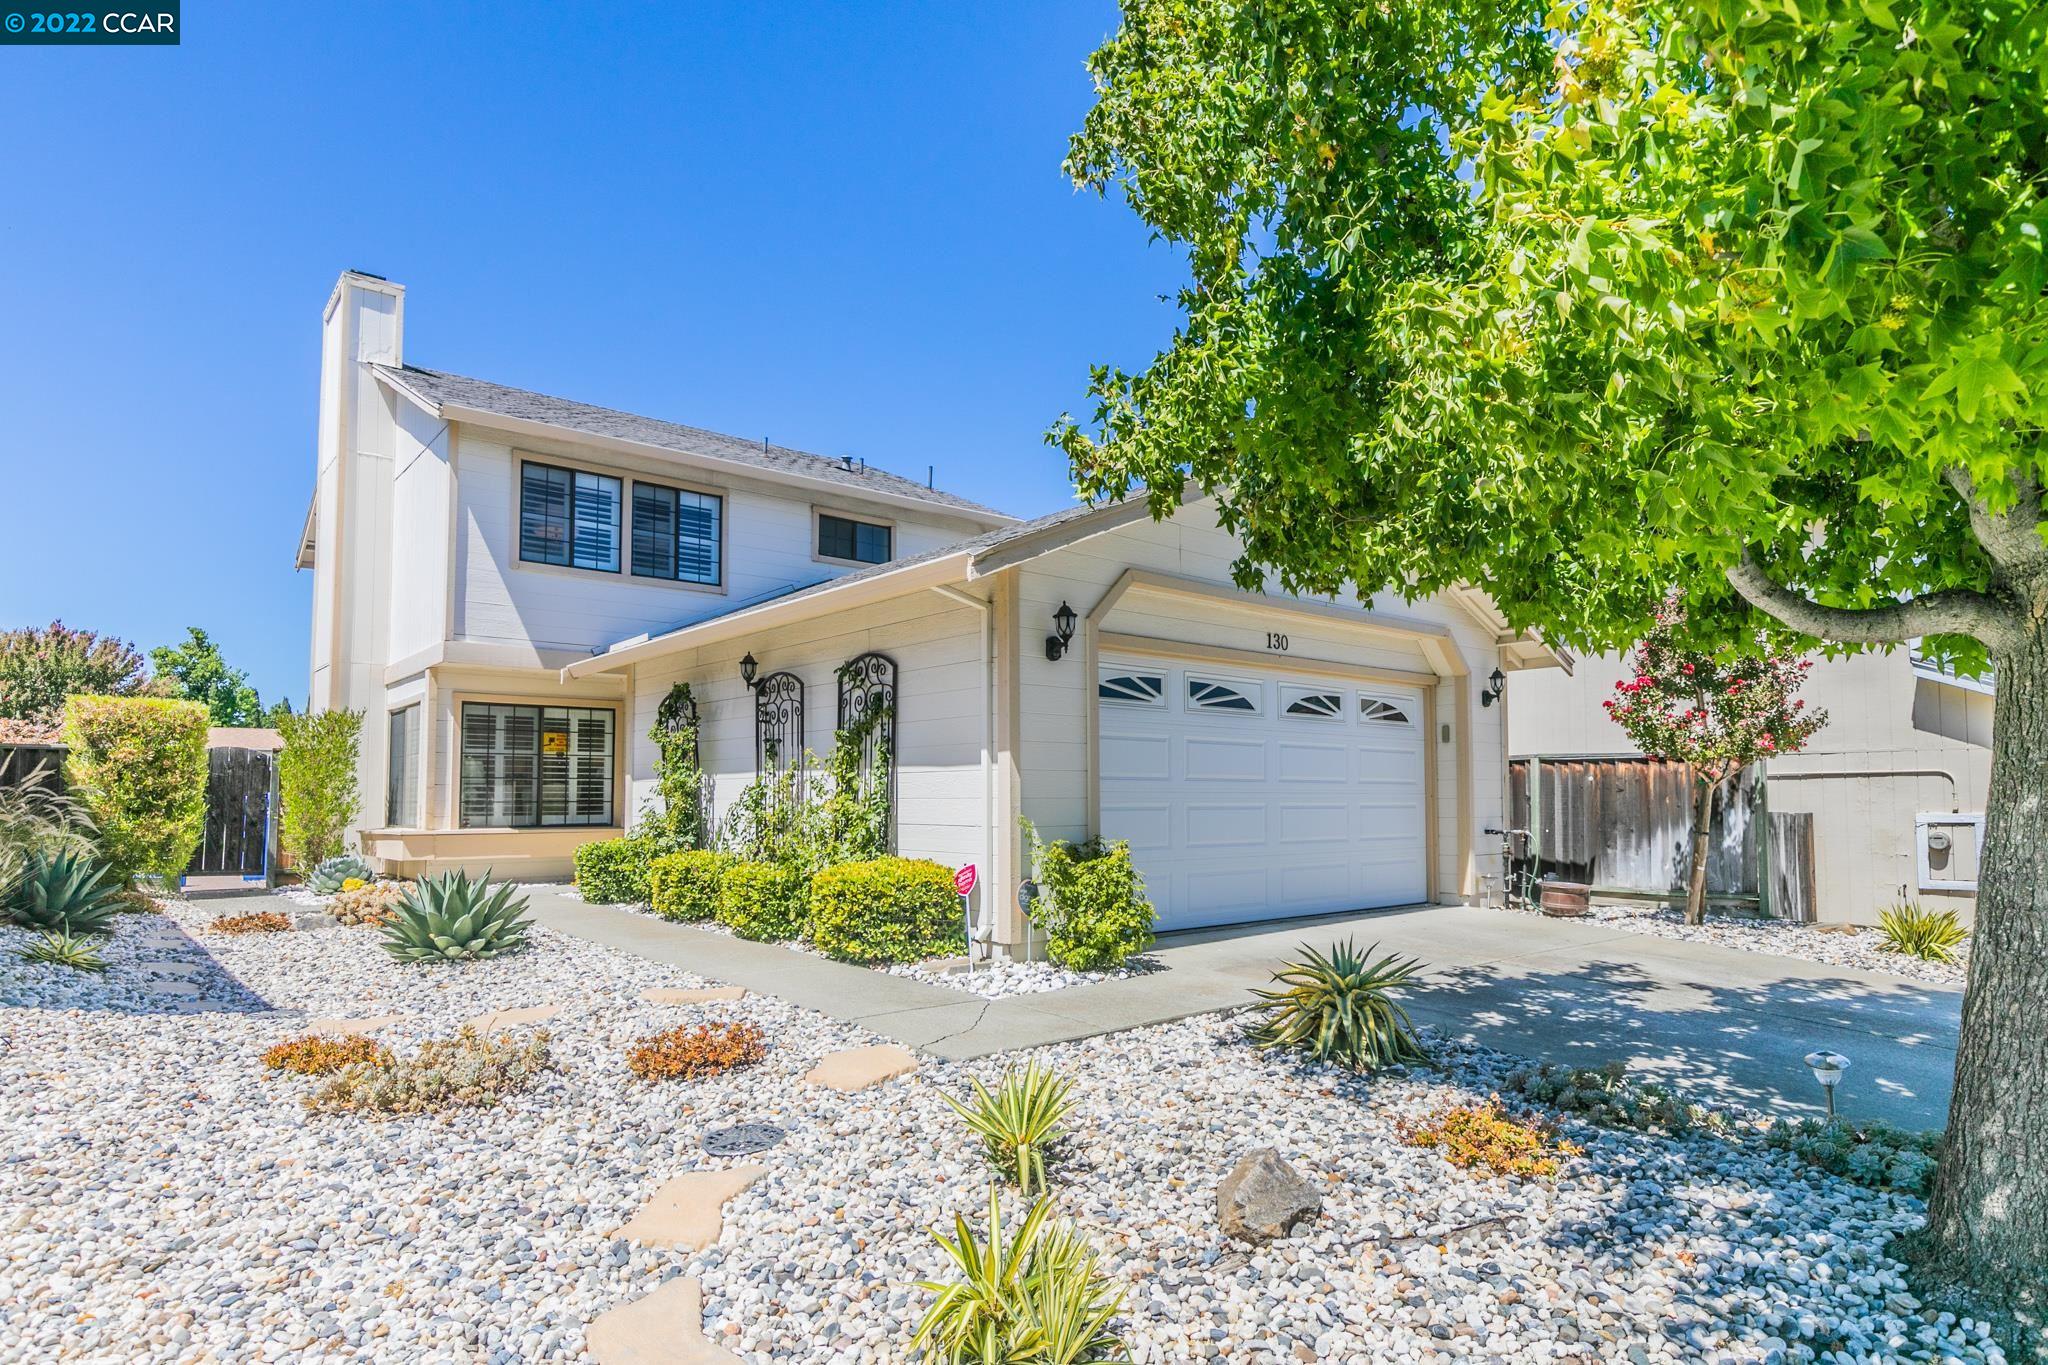 130 Pico Place, BAY POINT, CA 94565